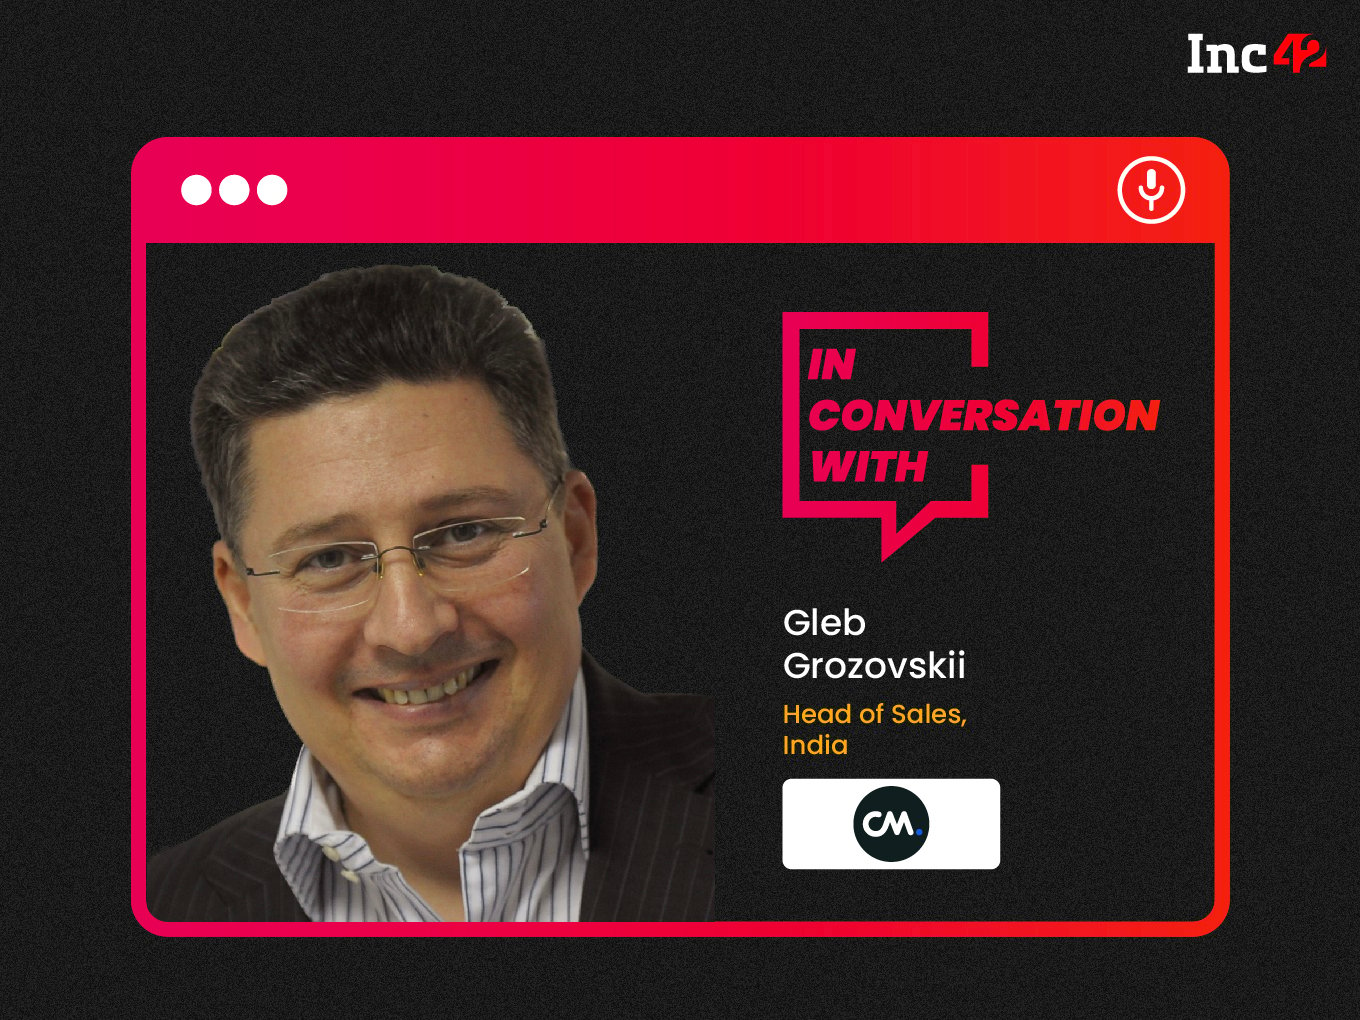 For Personalised Marketing, Marketers Have To Think Beyond Sending Notifications: CM.com’s Gleb Grozovskii